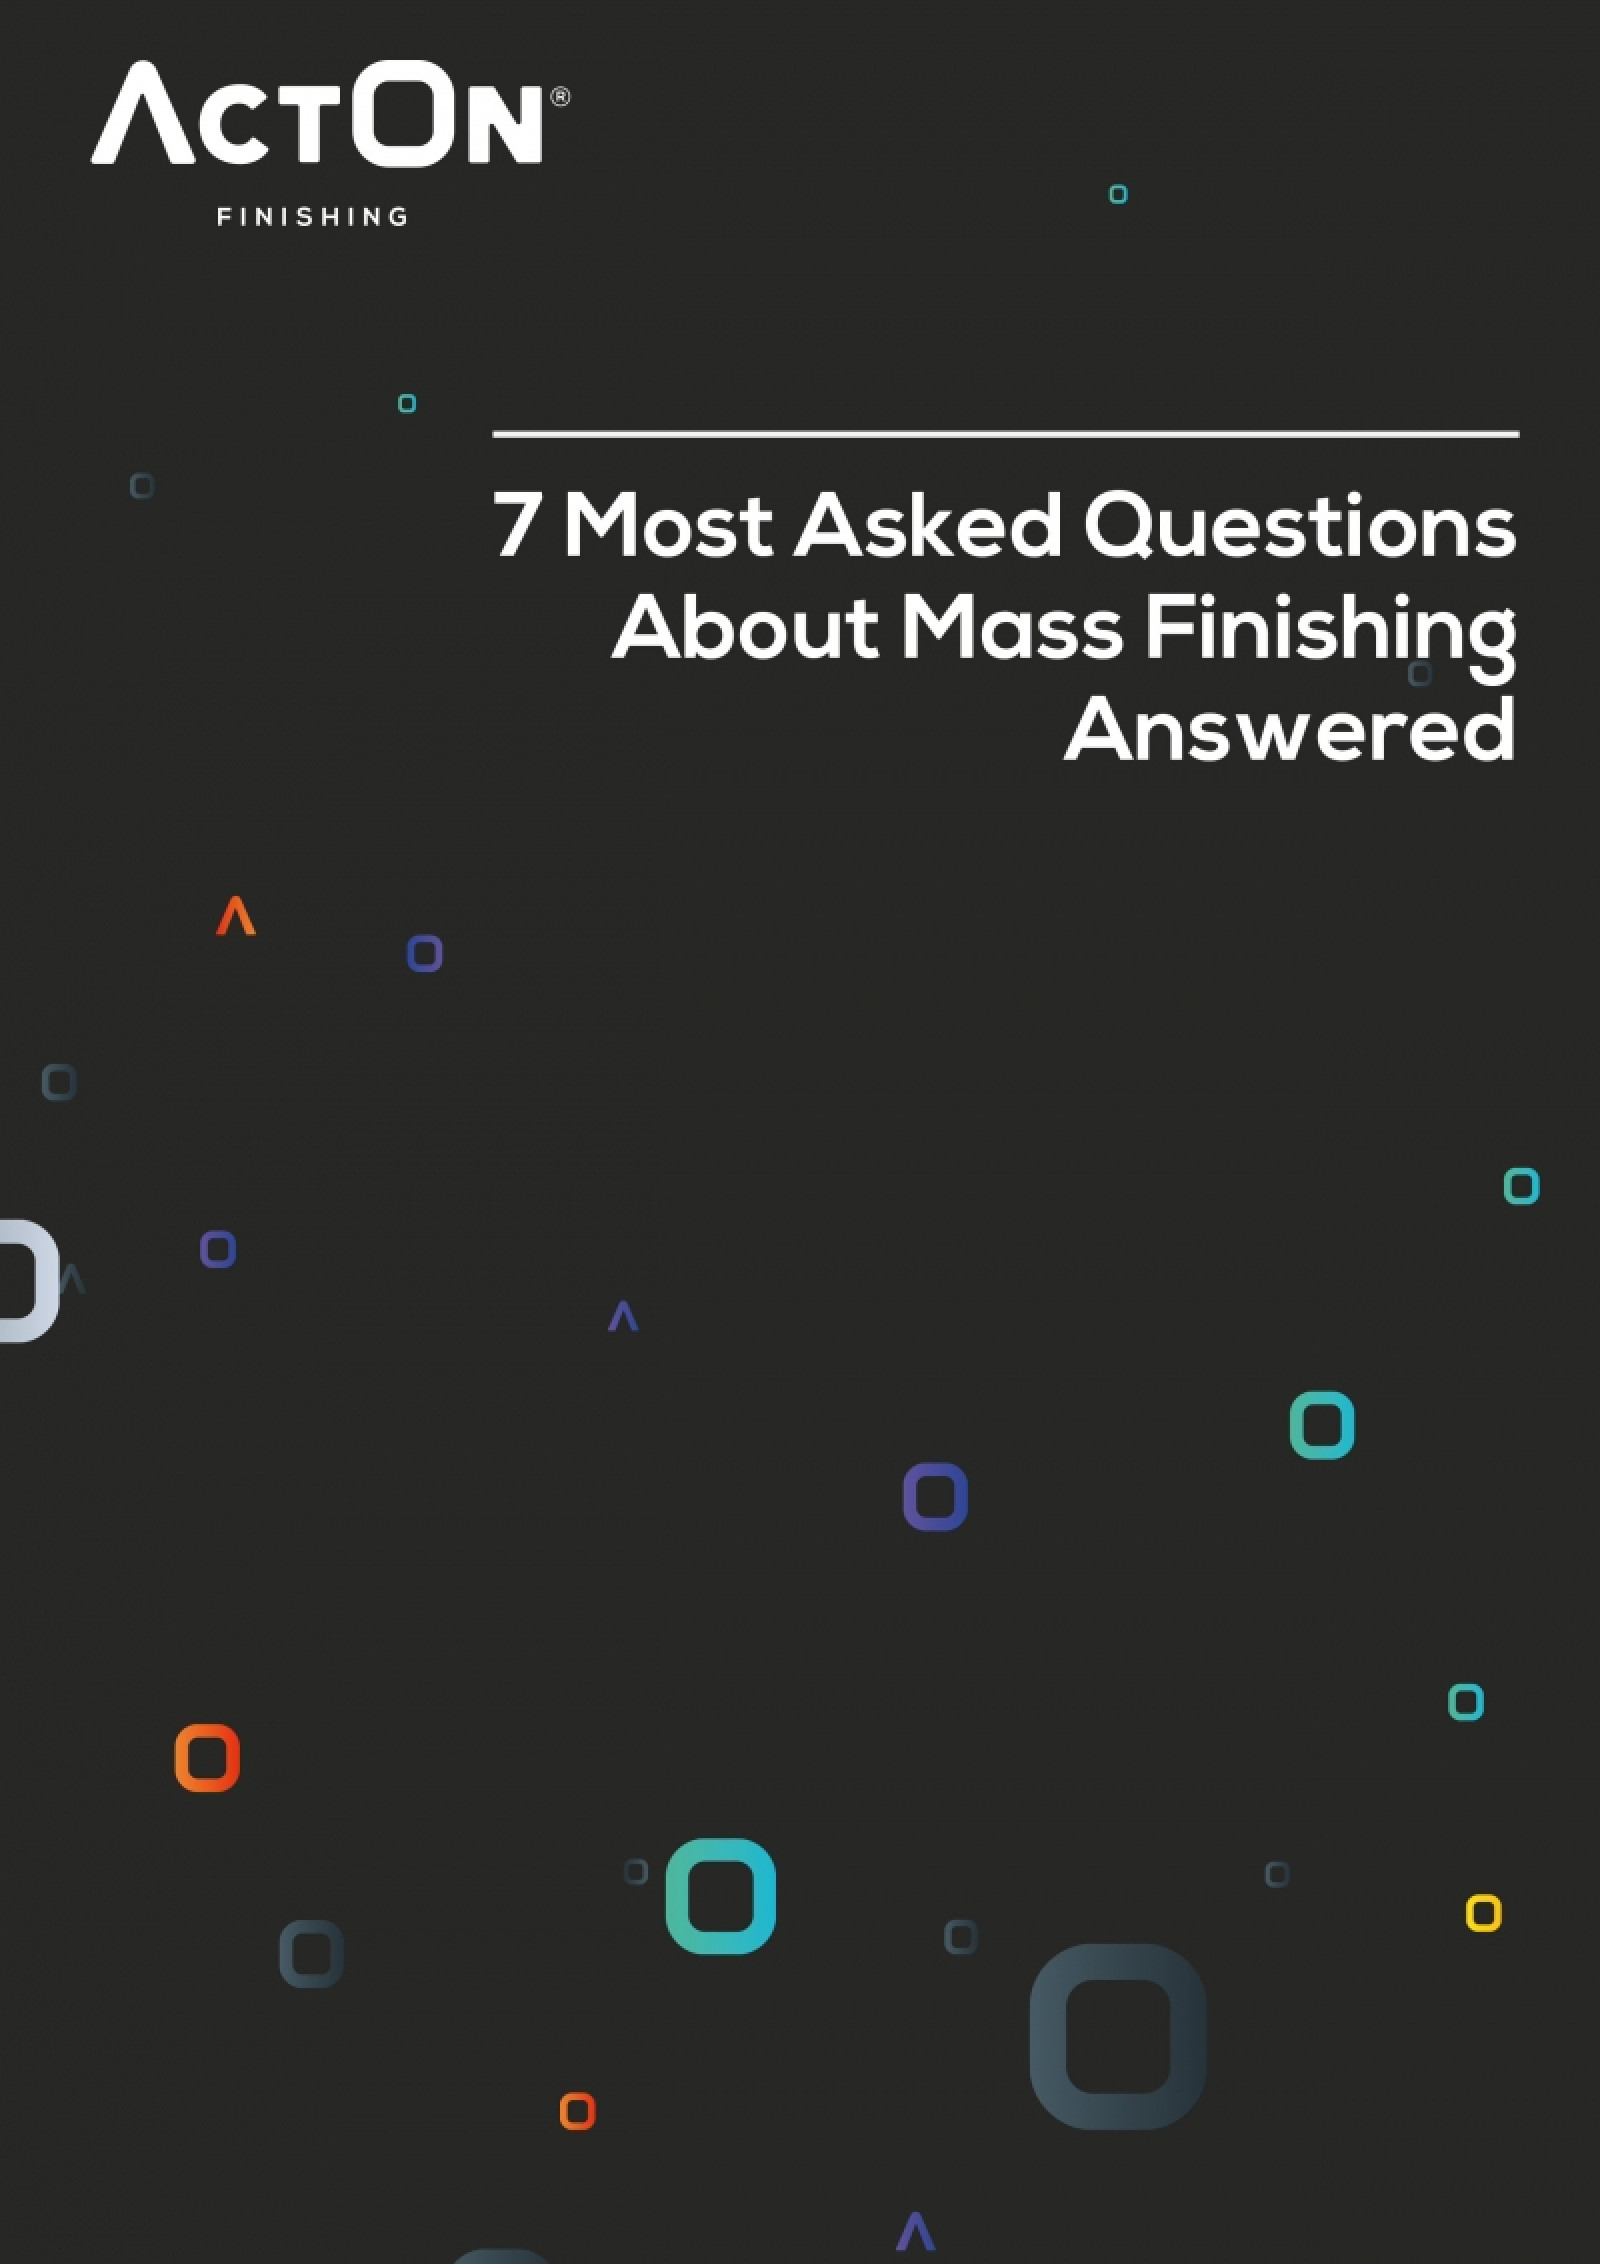 ActOn Finishing releases "7 Most Asked Questions About Mass Finishing" ebook